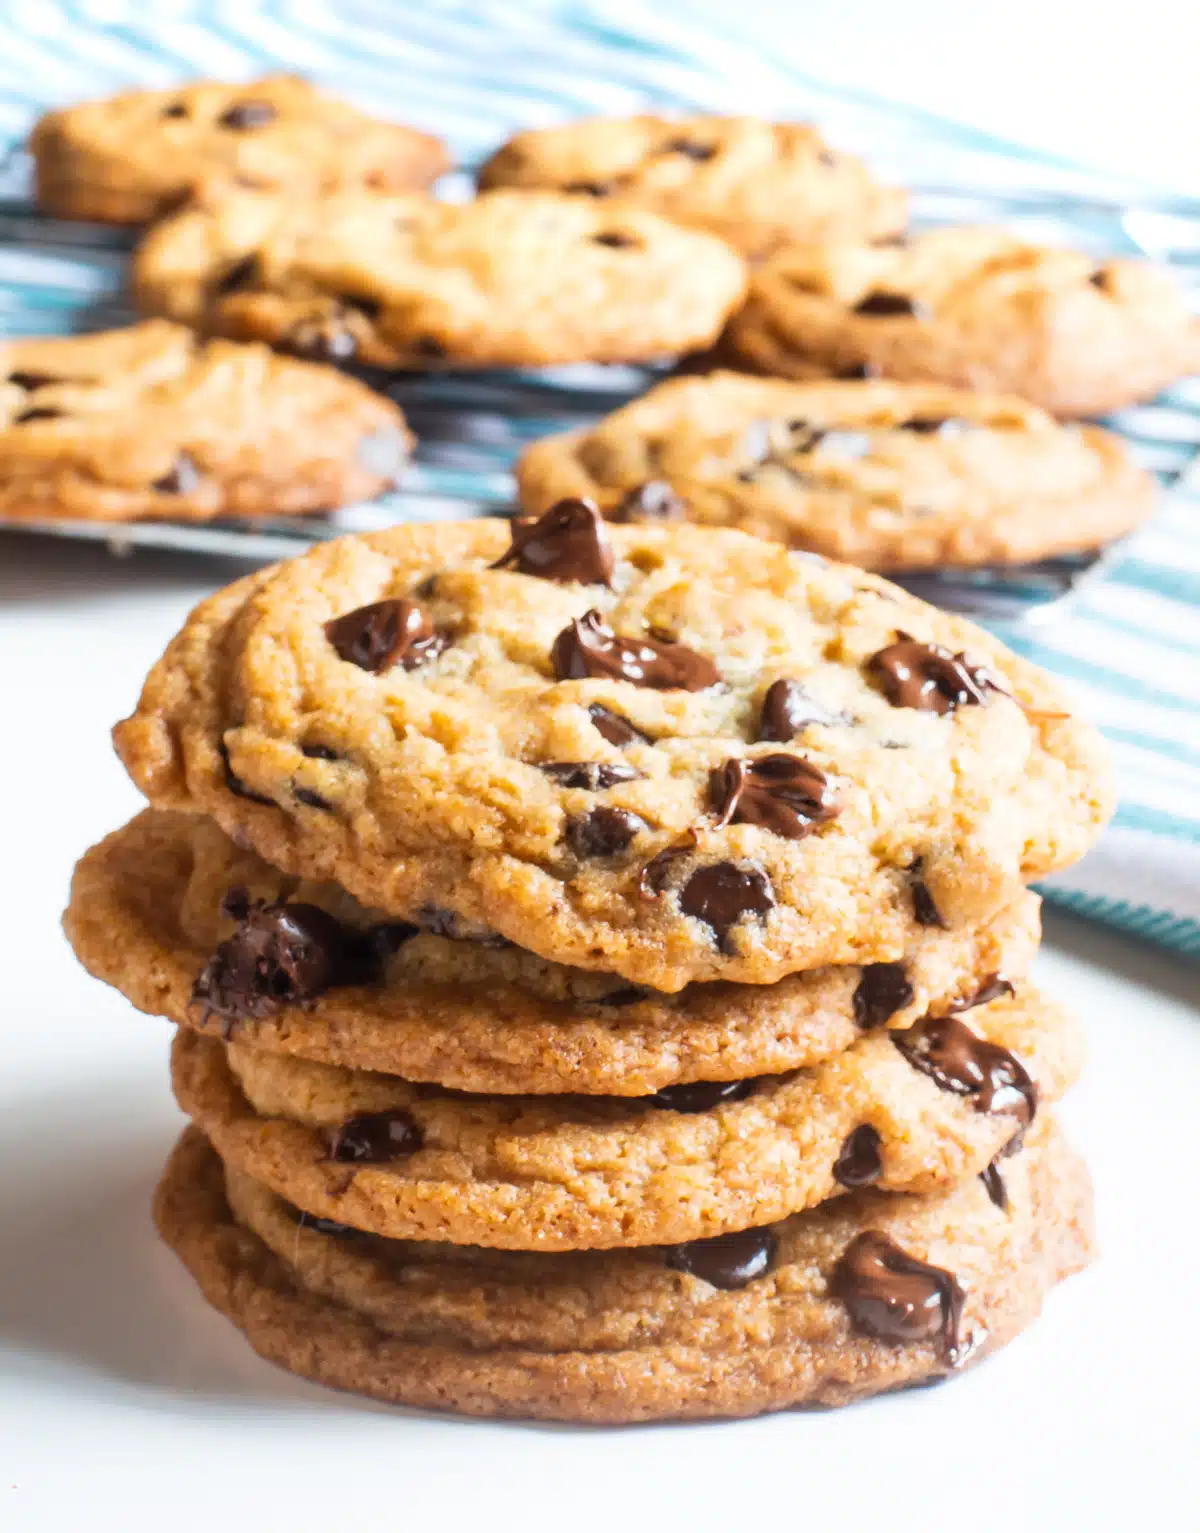 A close-up on a stack of four chocolate chip cookies sitting on on top of the other. More freshly baked chocolate chip cookies are in the background.